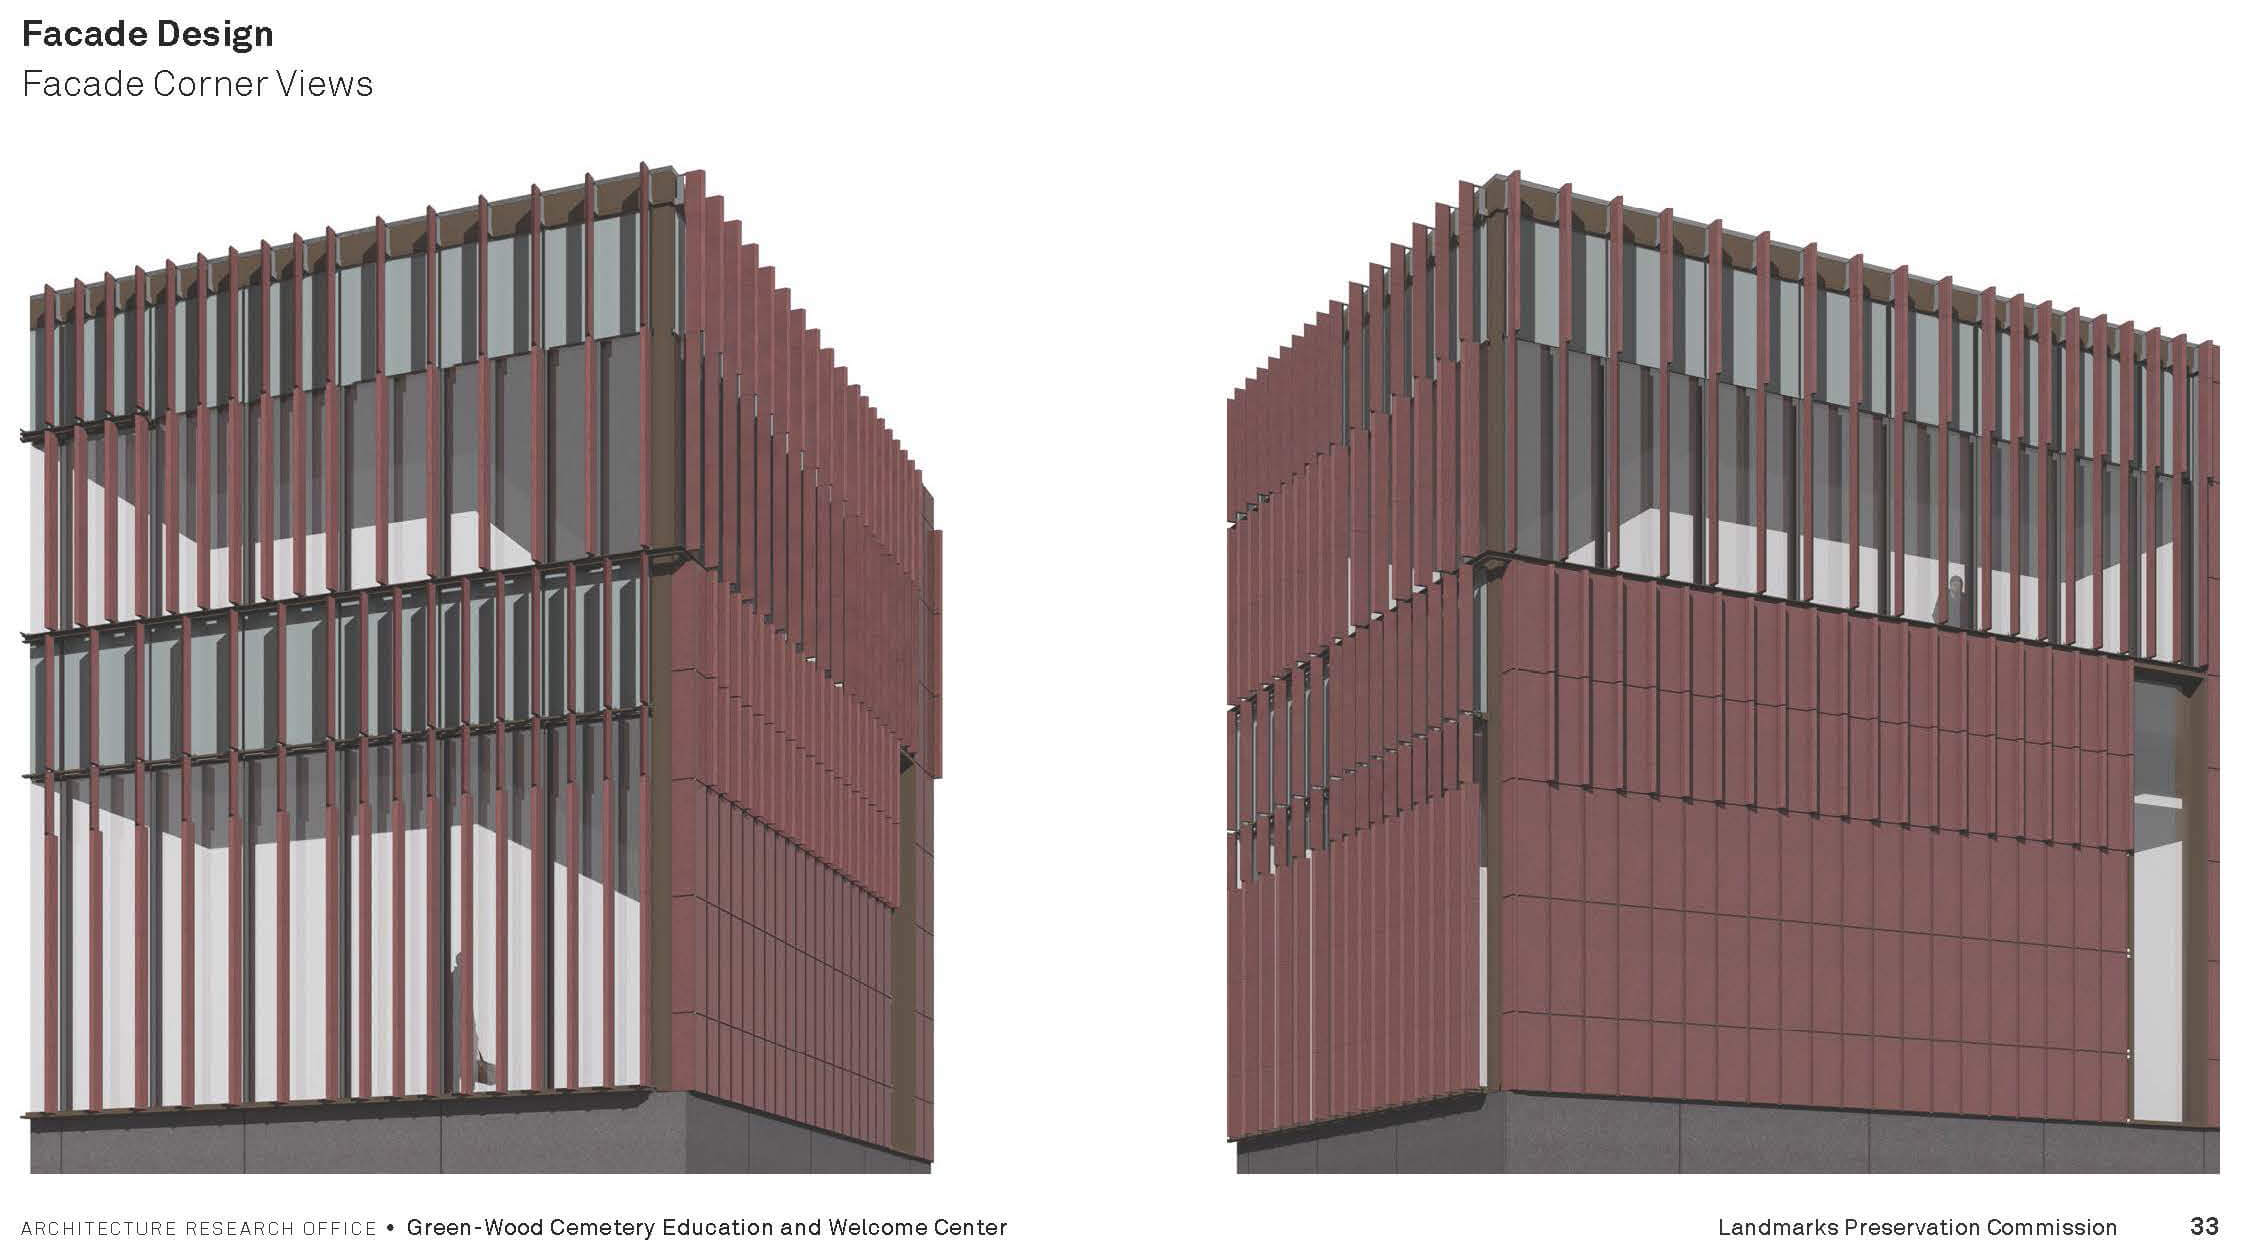 rendering of the facade details